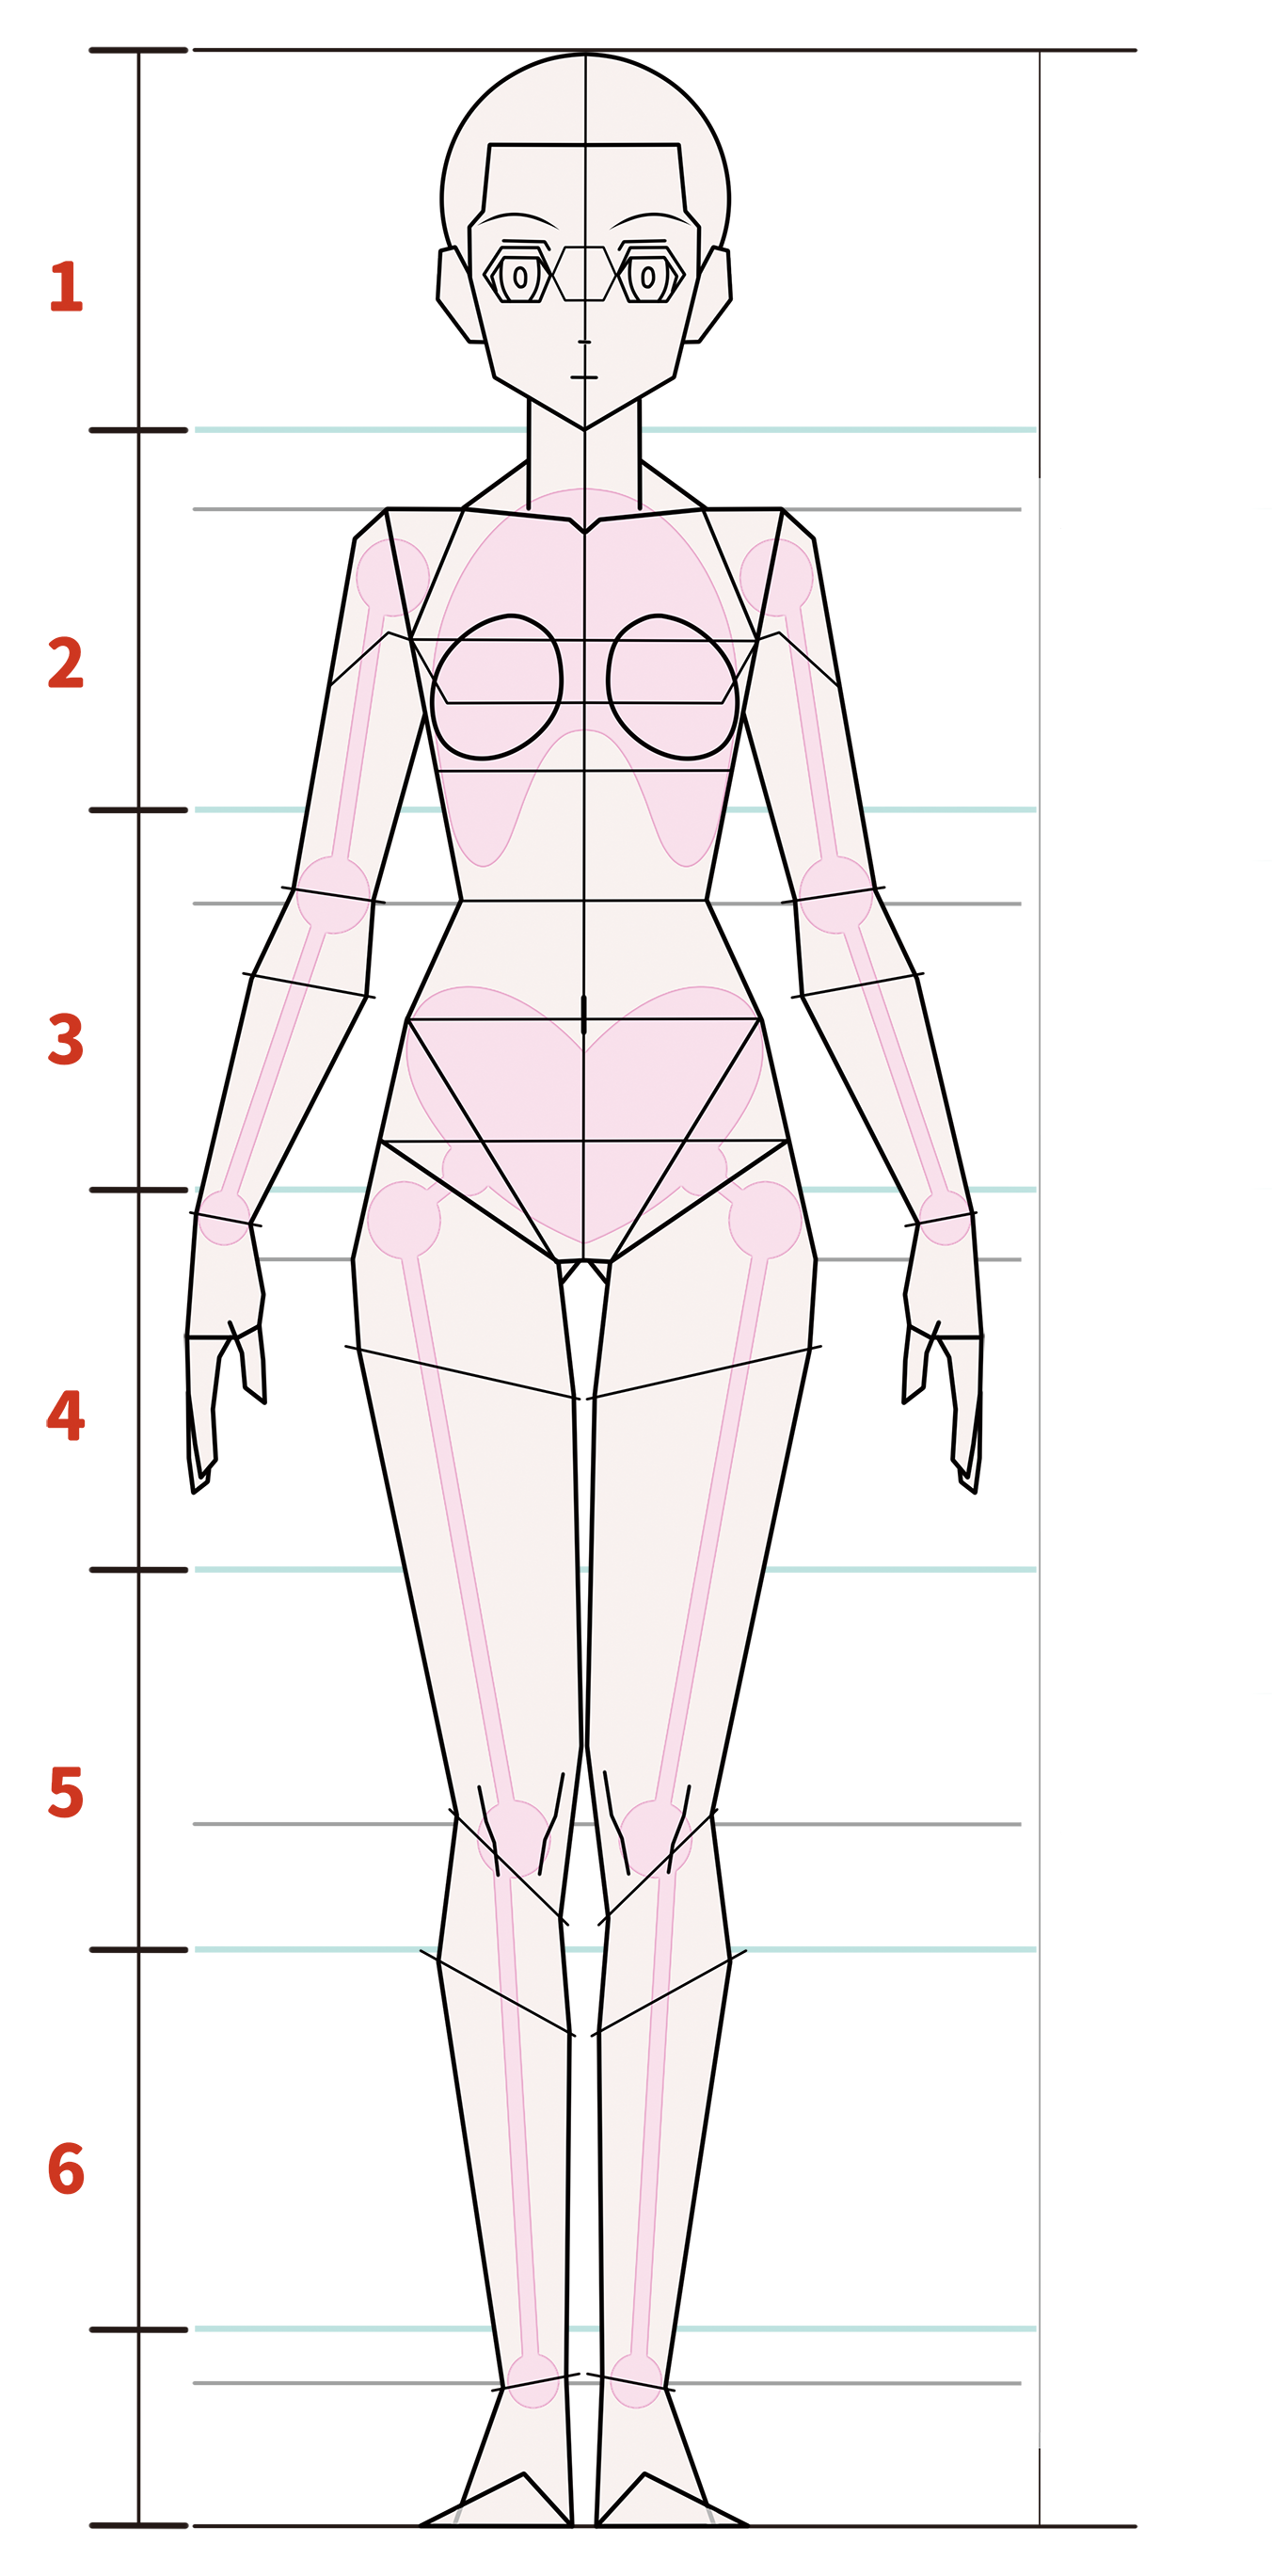 The Ultimate Guide on How to Draw a Girl Anime